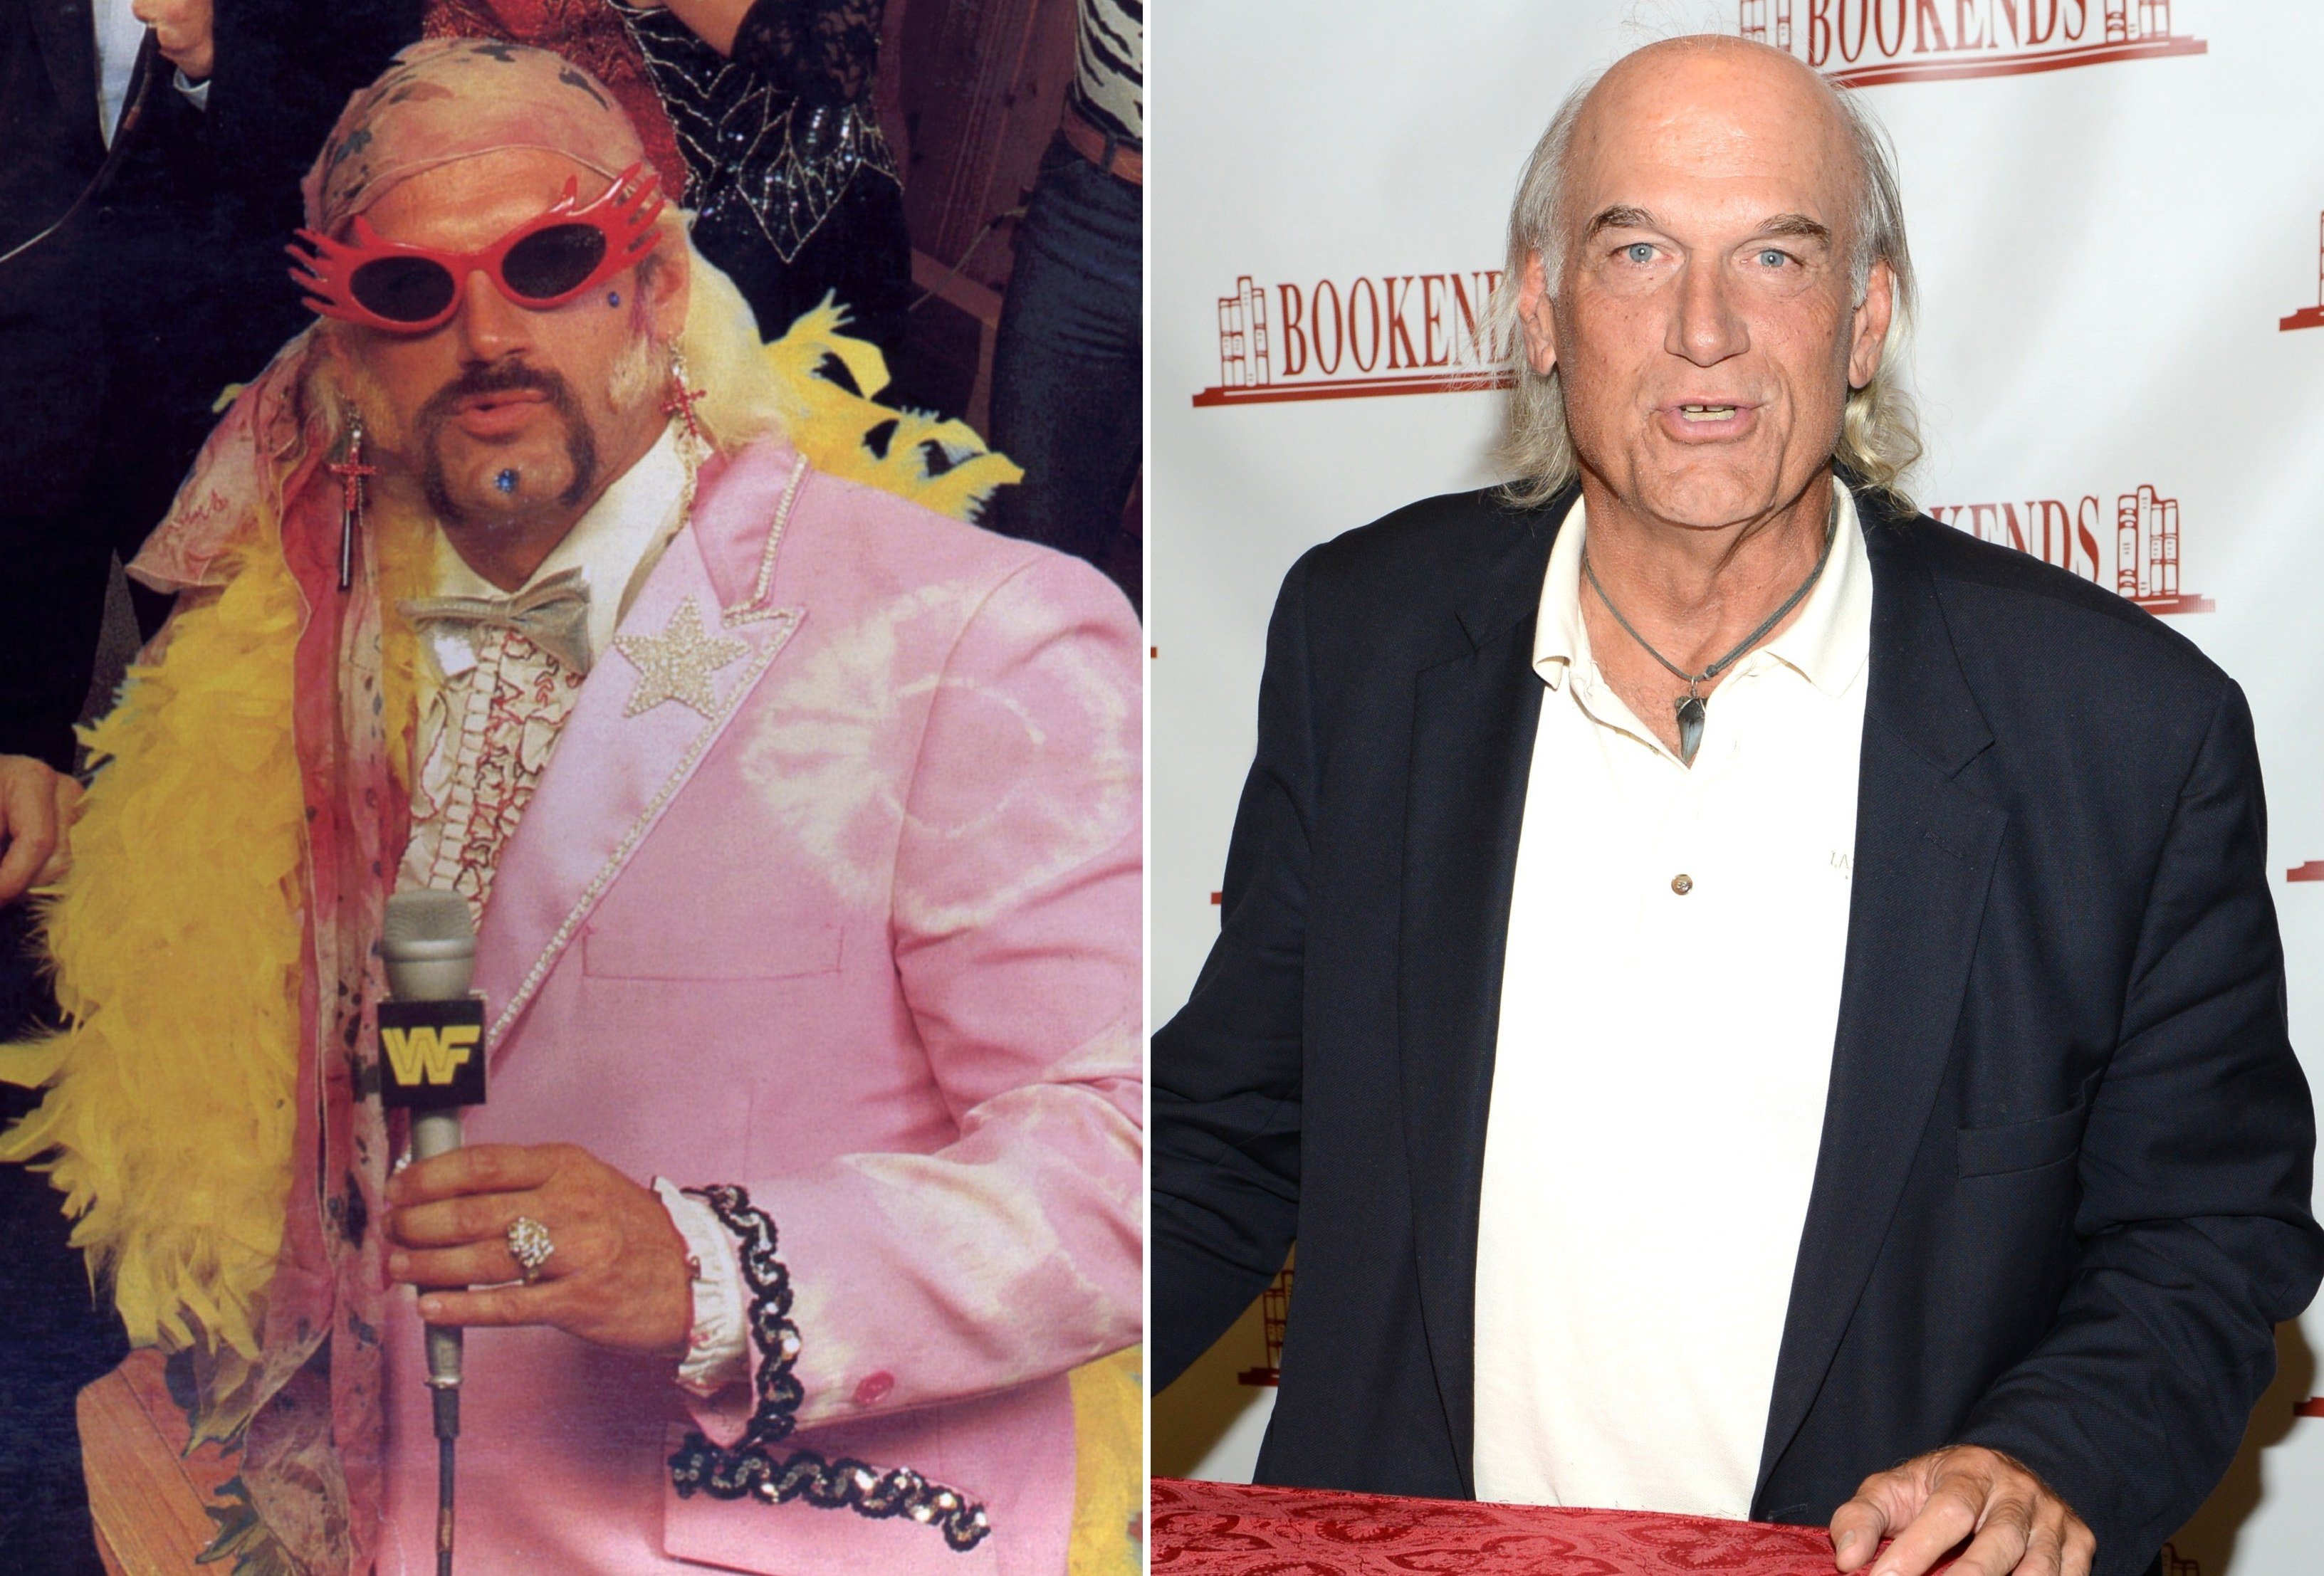 Who is Jesse Ventura, the ex-WWE wrestler-turned-governor who said Donald Trump copied him? He was floated as RFK Jr’s running mate, but may now return to WWE. Photos: AP, Getty Images